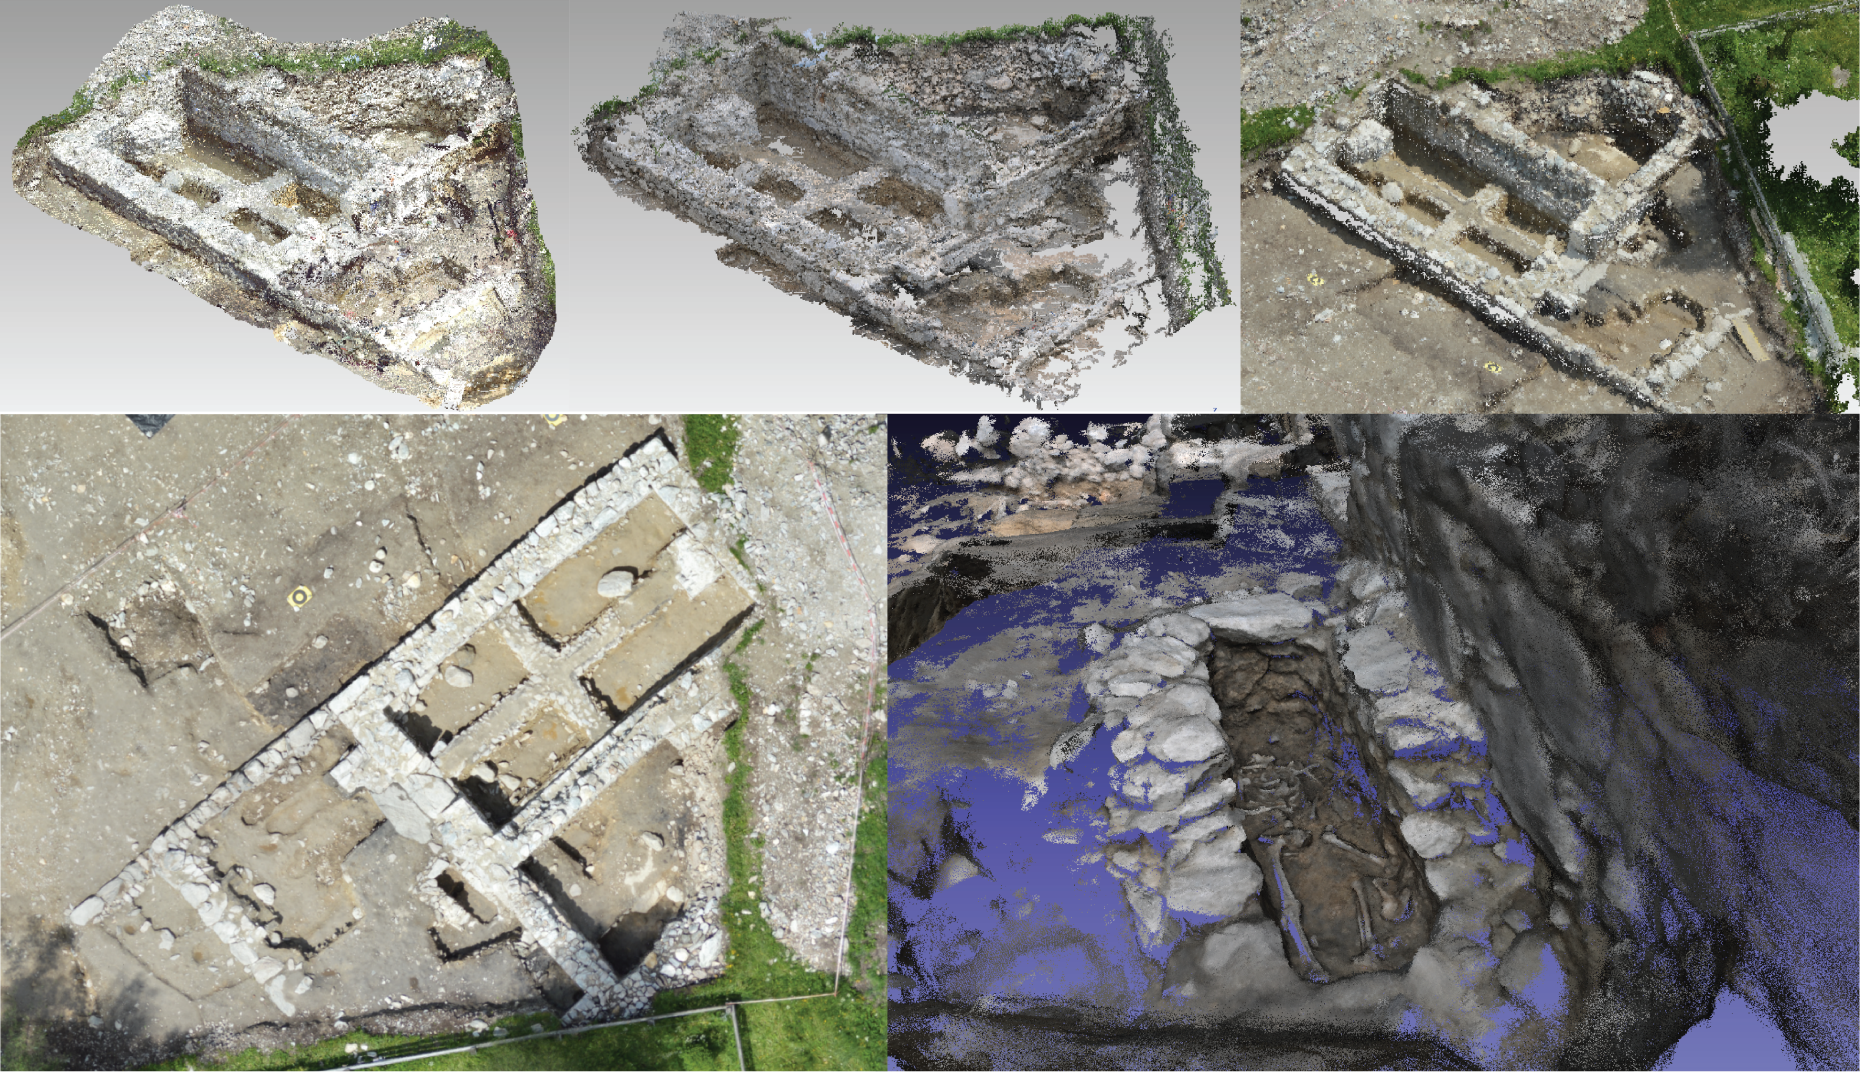  the models acquired with the laser scanner, the terrestrial photogrammetry and the UAV photogrammetry.